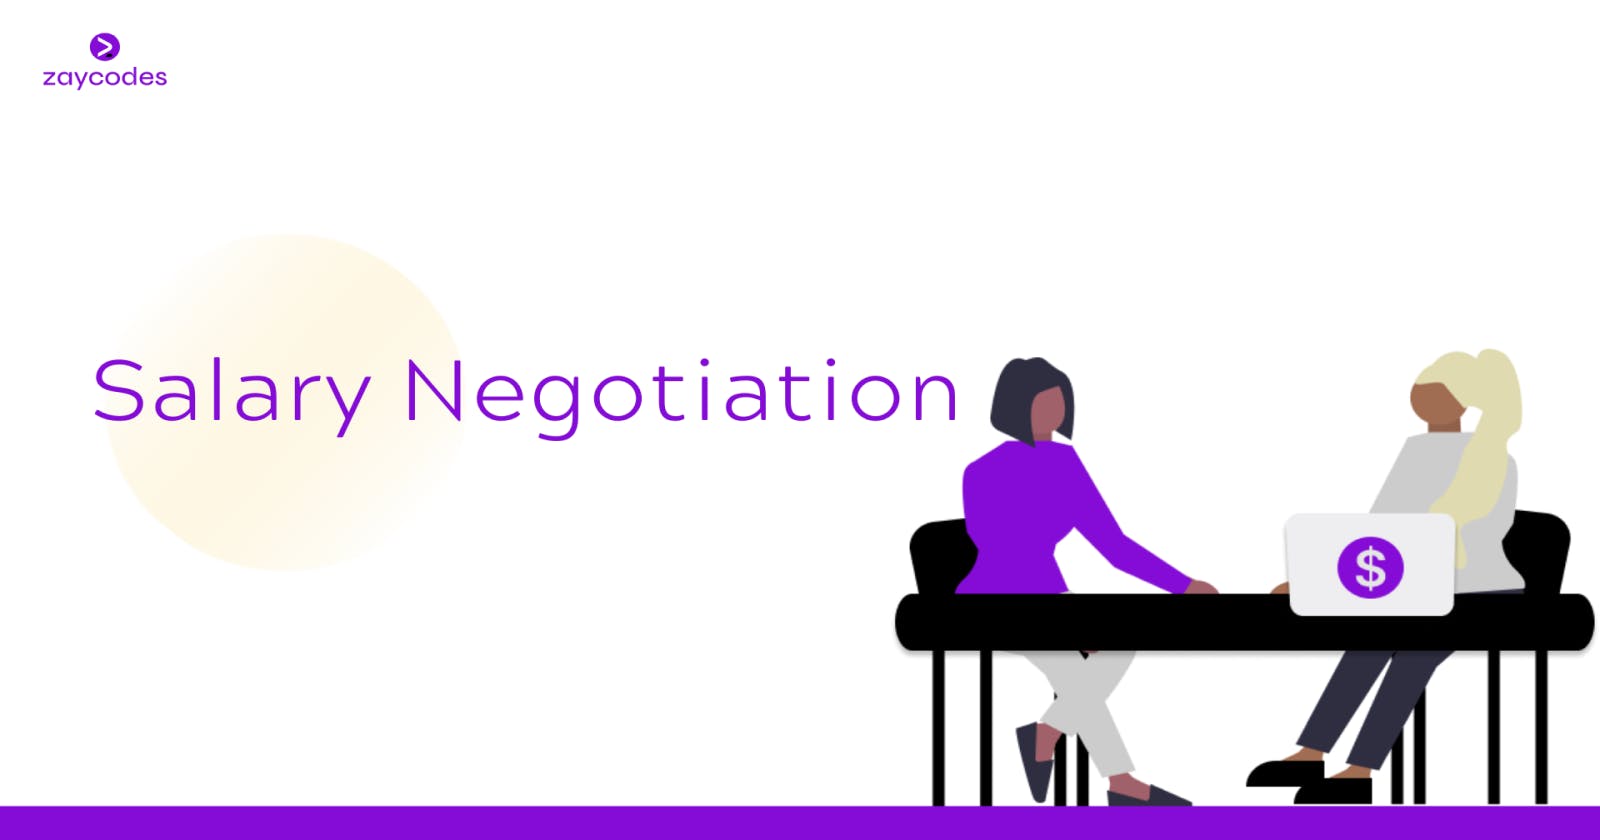 What You Need to Know About Salary Negotiation